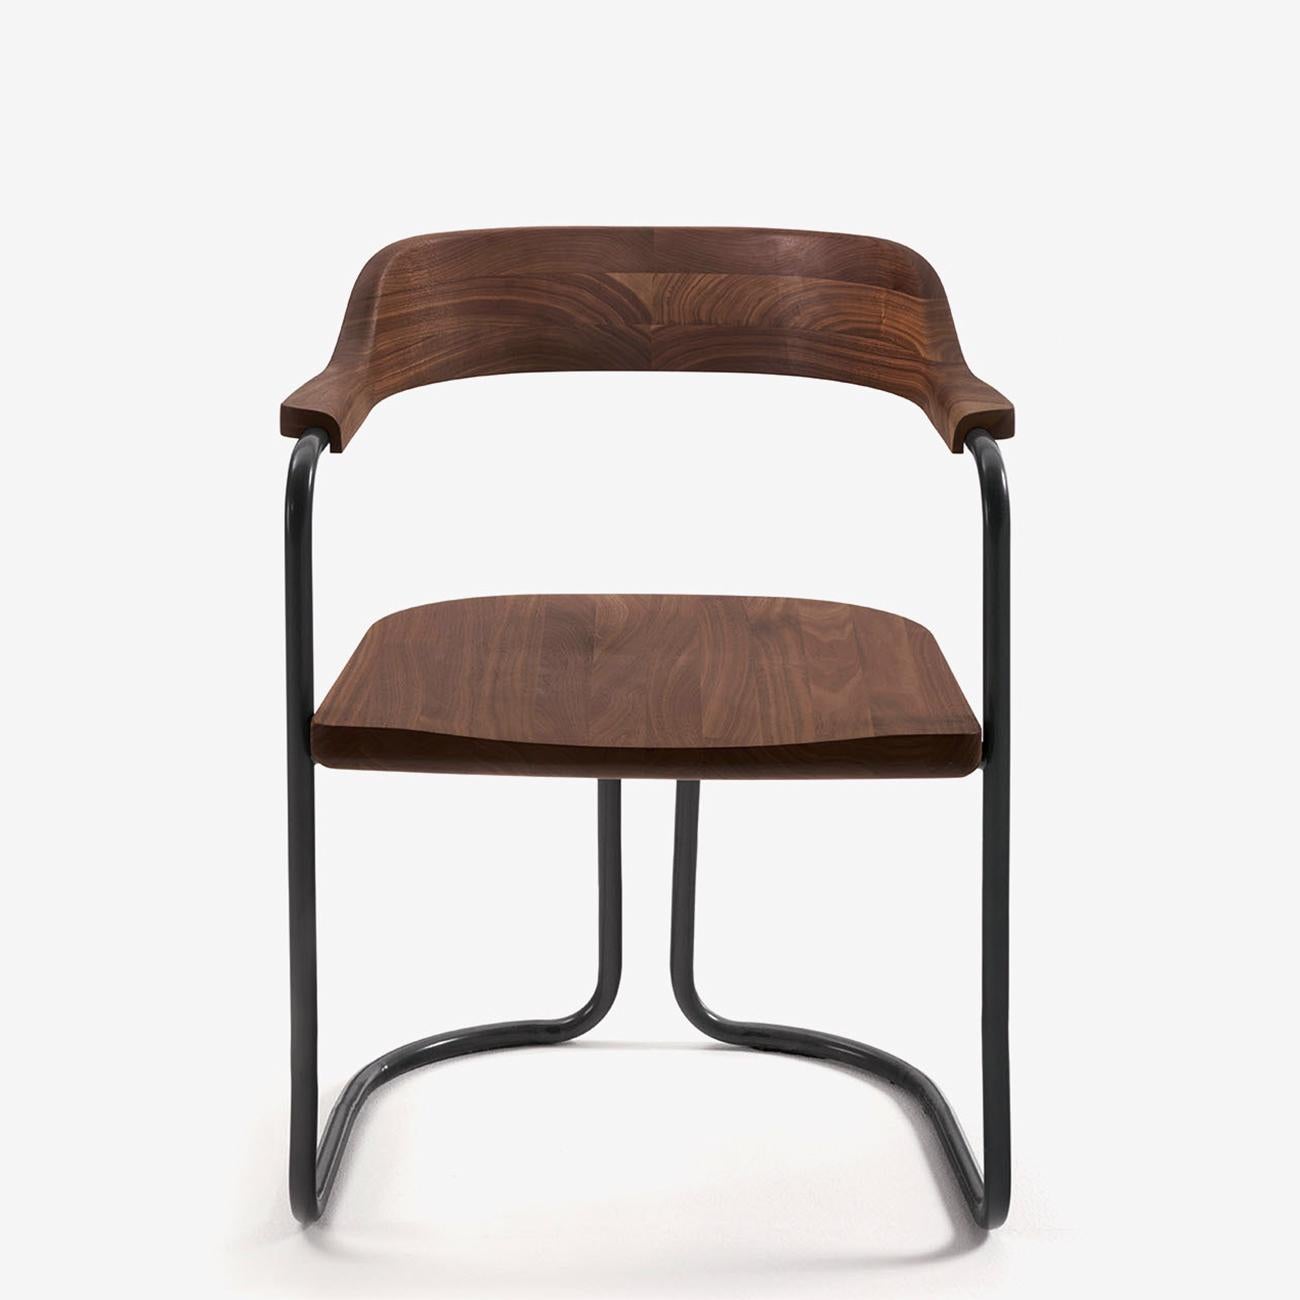 Chair Talente walnut with structure in iron in
lacquered finish. Seat and backrest in solid
walnut wood. Wood treated with wax with 
natural pine extracts.
Also available in solid oak in natural finish, on request.